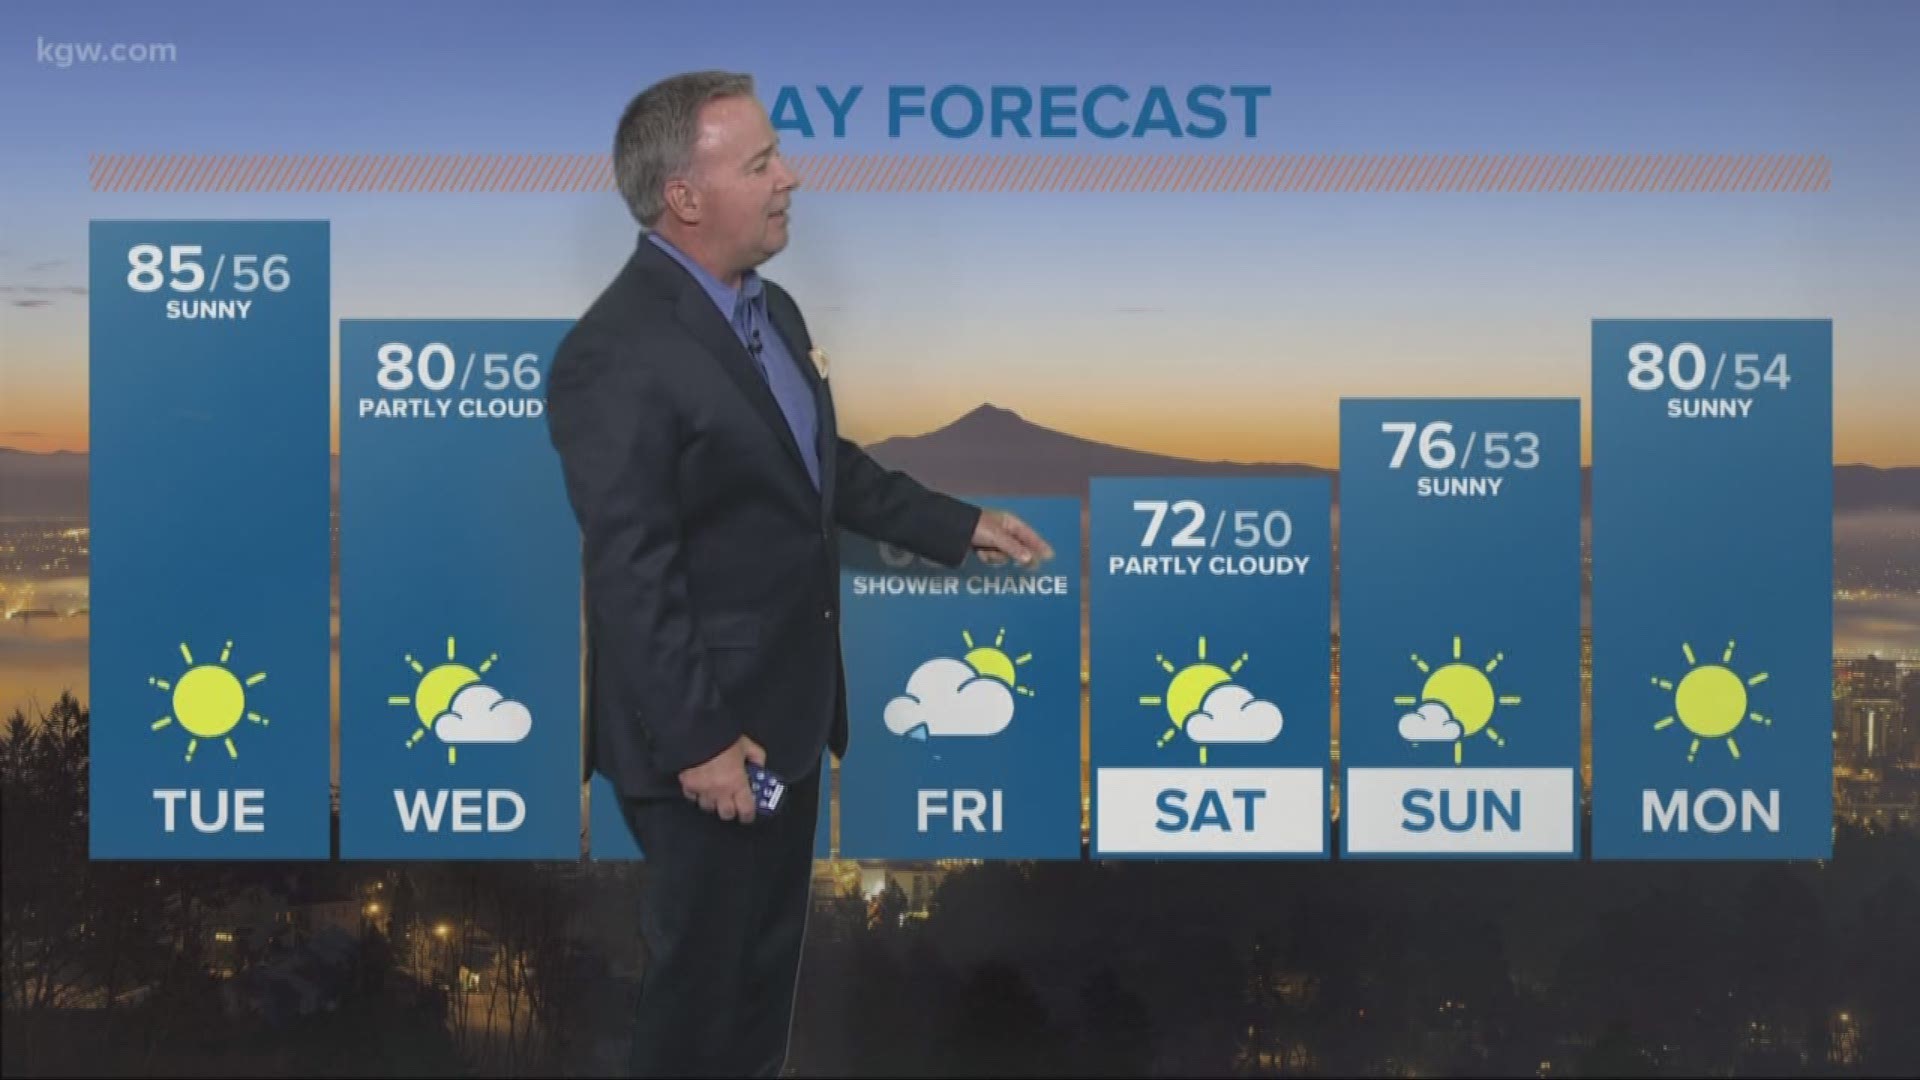 KGW Noon forecast 5-22-18